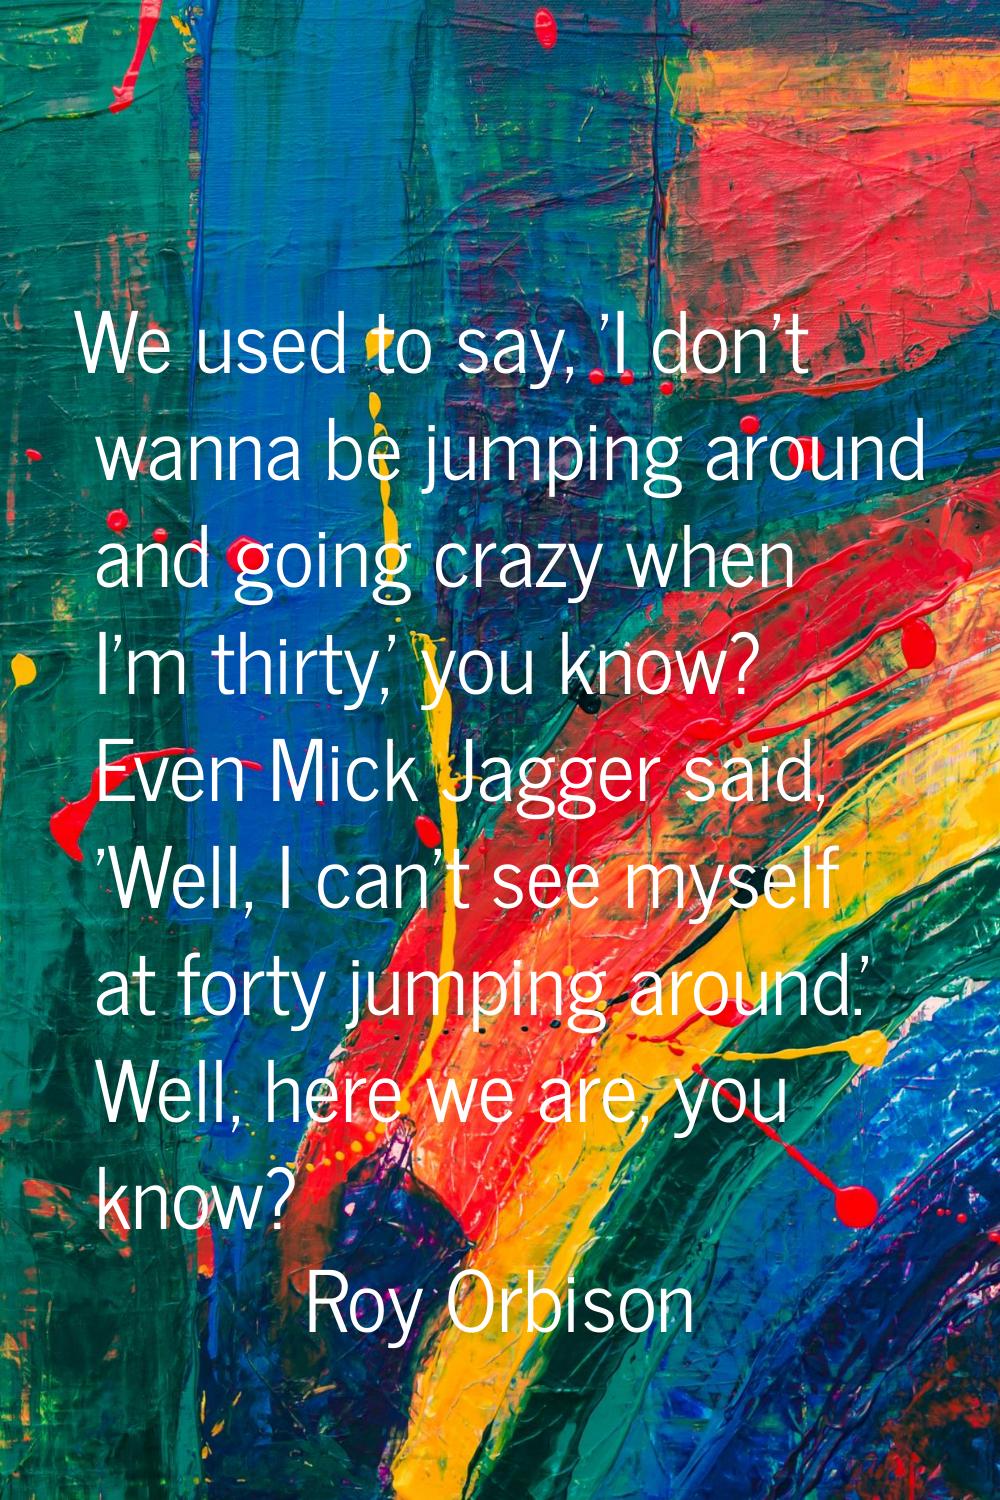 We used to say, 'I don't wanna be jumping around and going crazy when I'm thirty,' you know? Even M